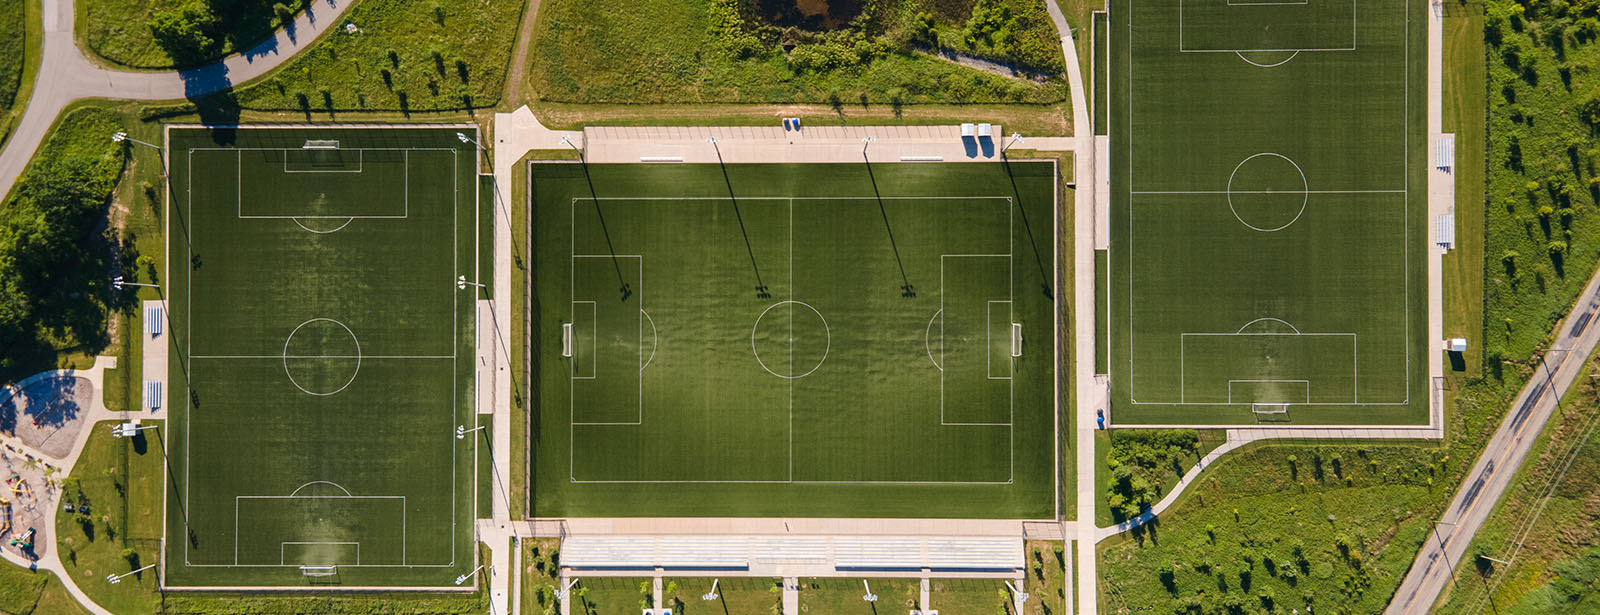 Aerial view of soccer fields with sports lighting